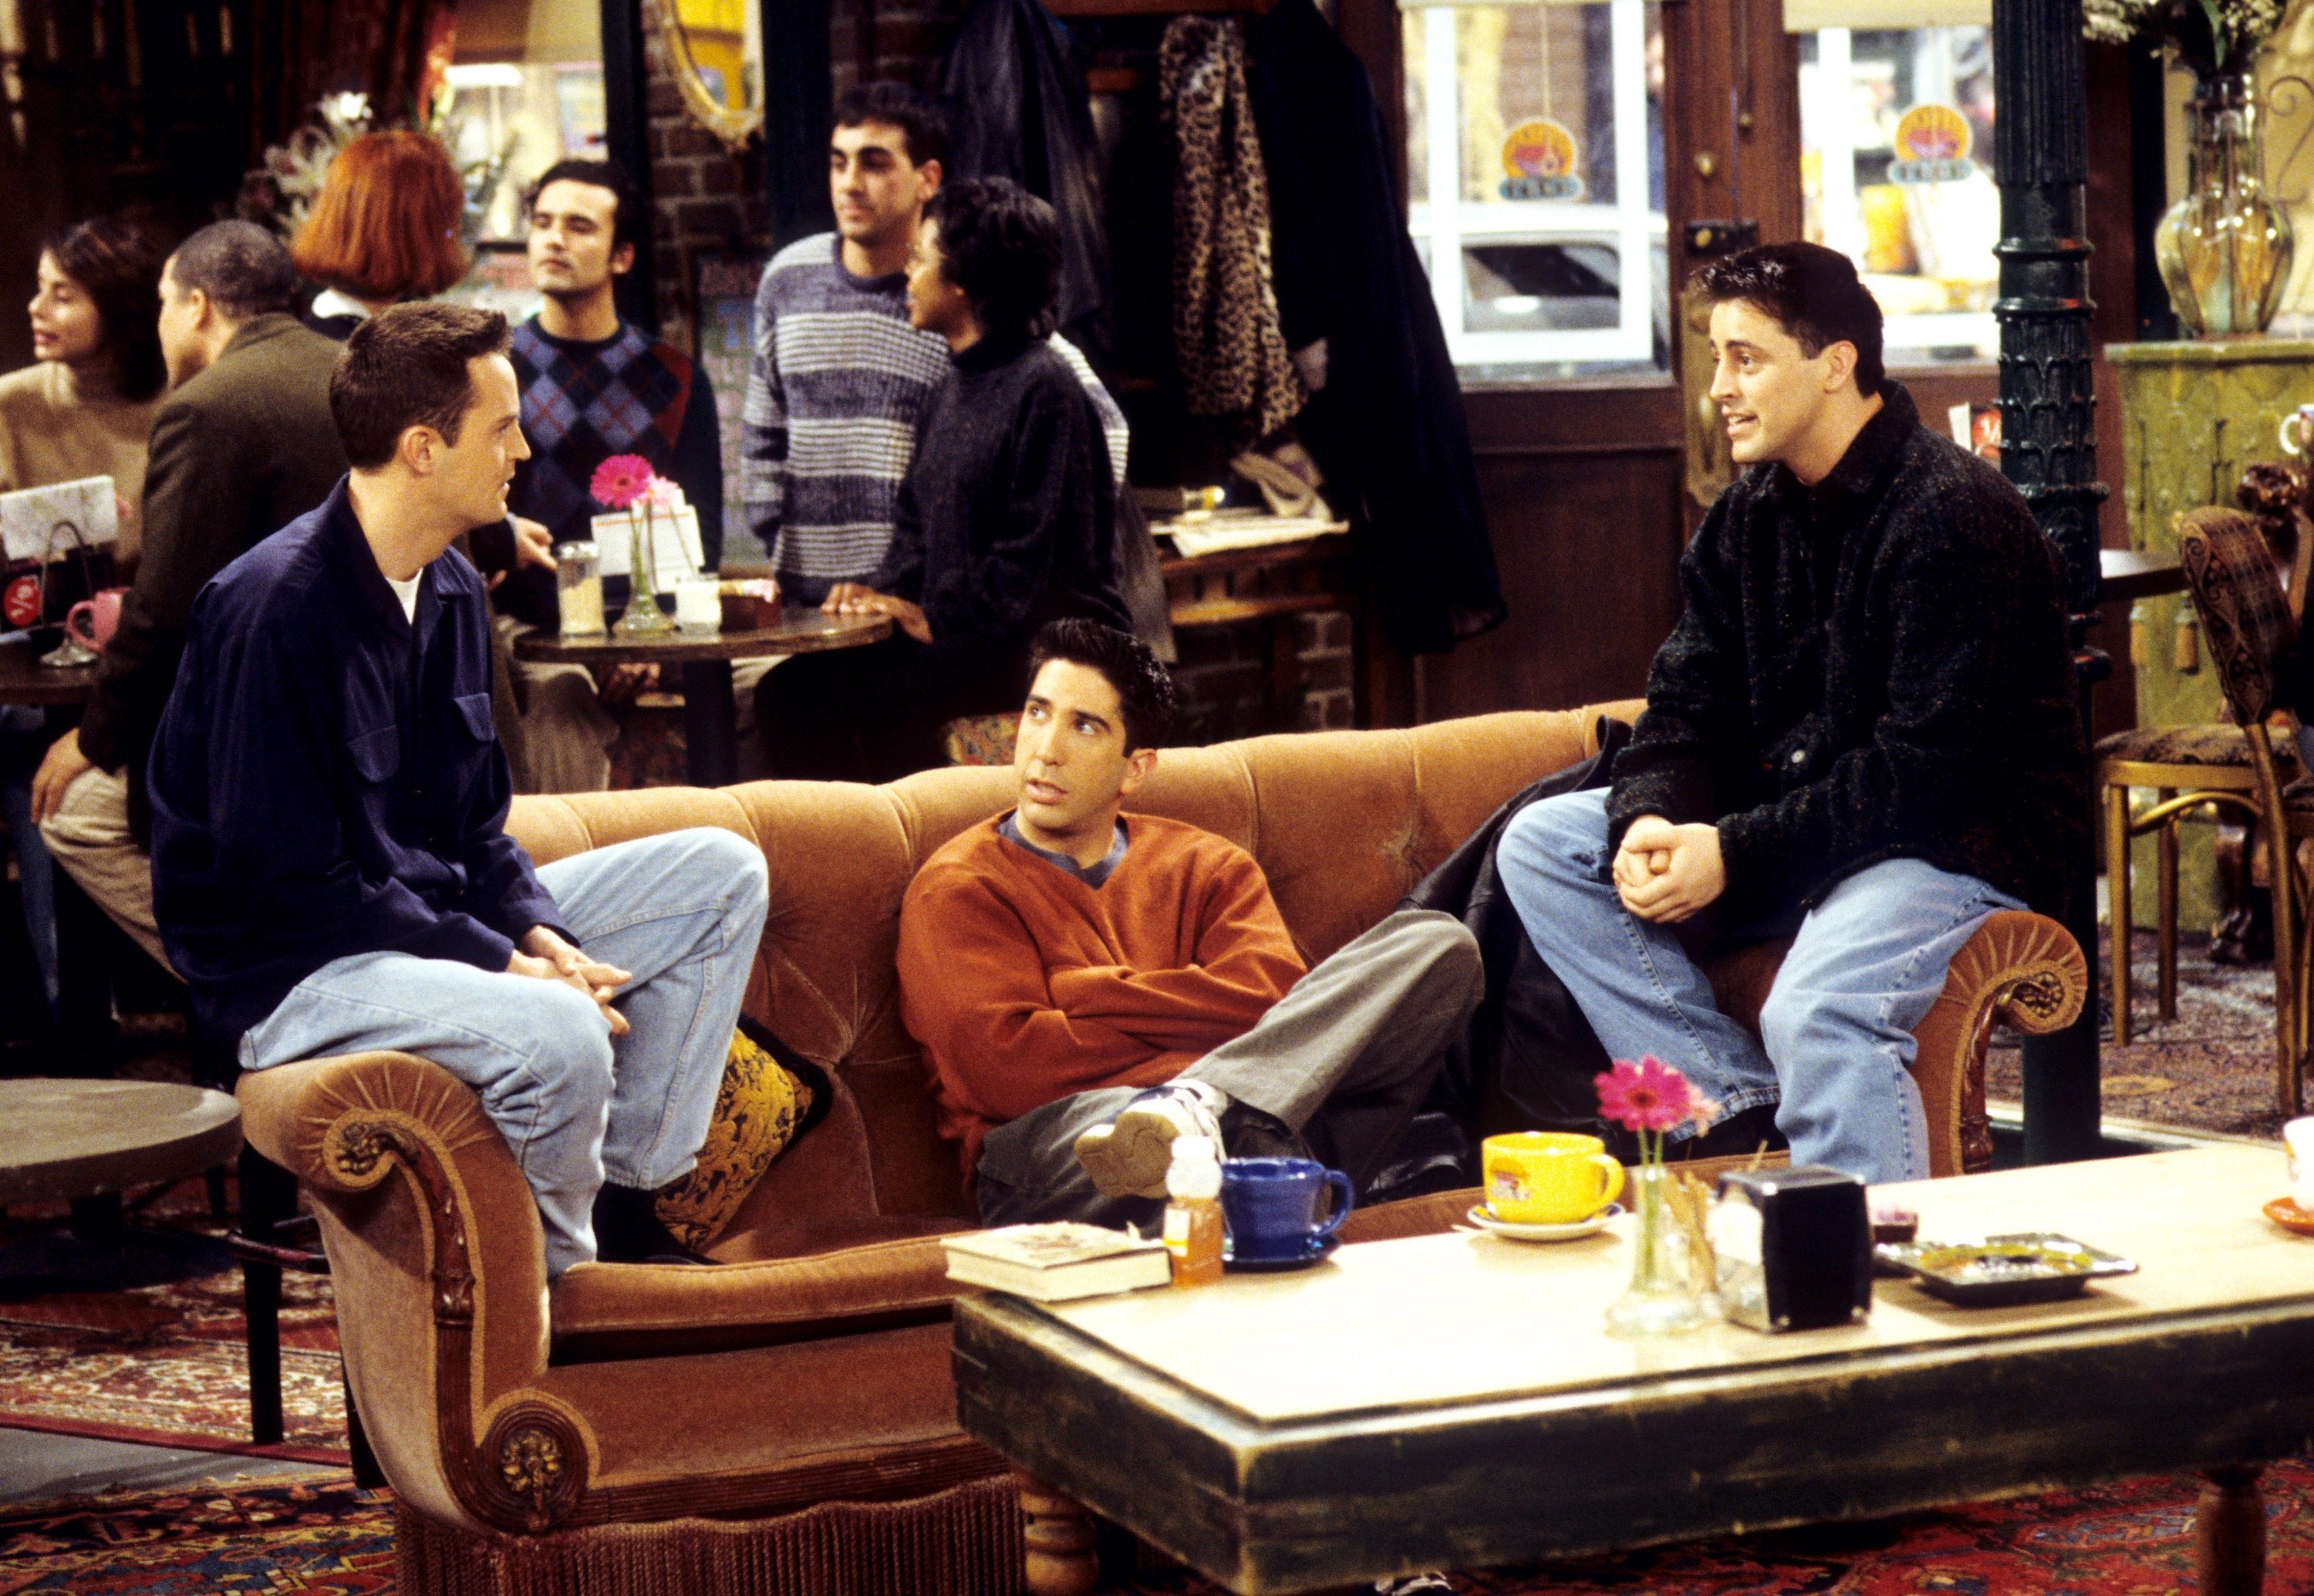 Matthew Perry, David Schwimmer, and Matt LeBlanc sitting on the couch at the Central Perk.